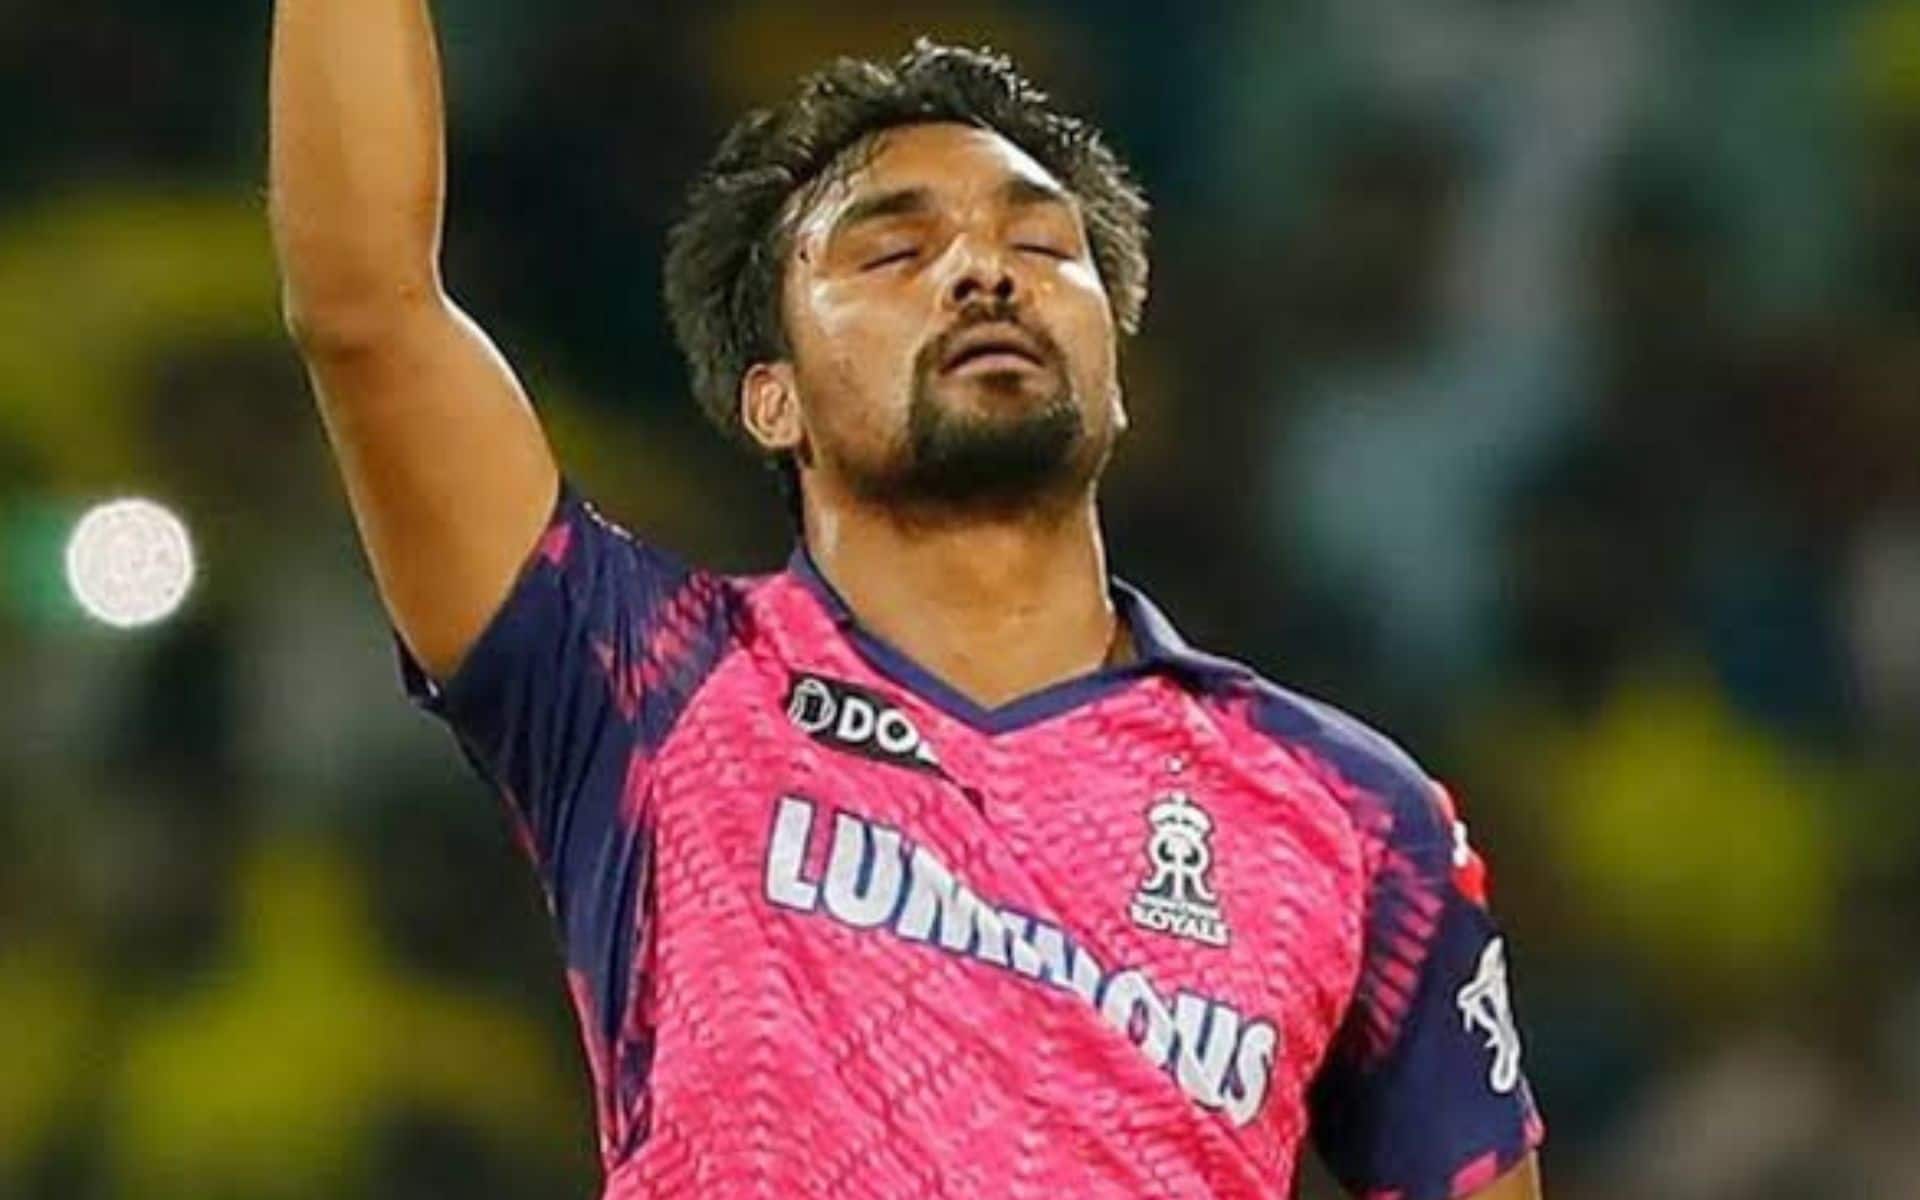 Sandeep Sharma has won the Most Player Of The Match award four times against RCB [x.com]